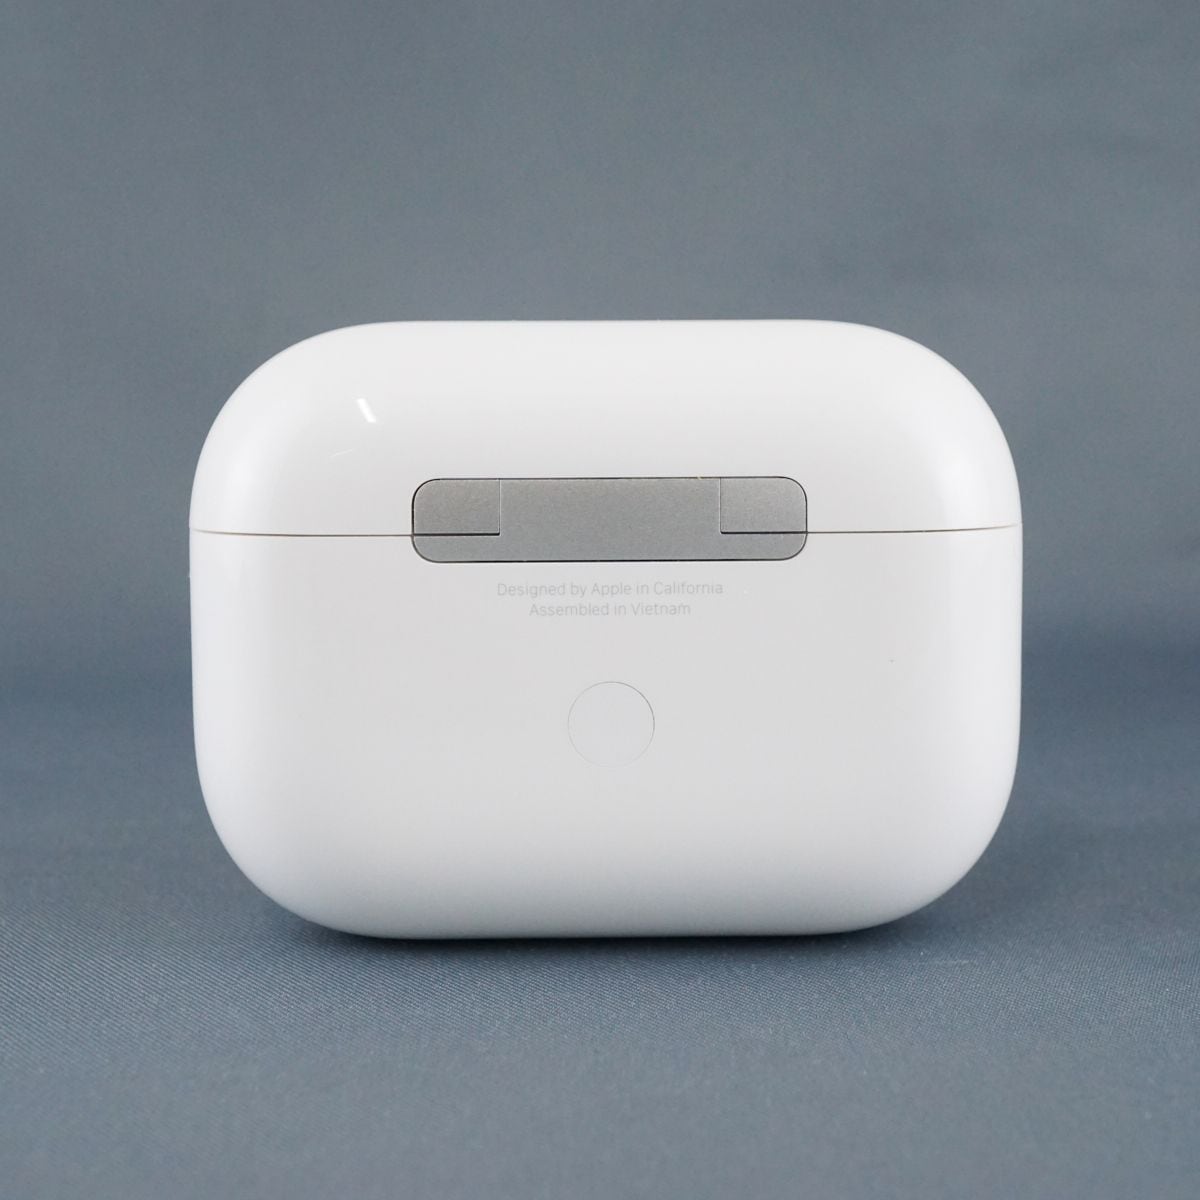 Apple AirPods  エアーポッズ 充電 ケース